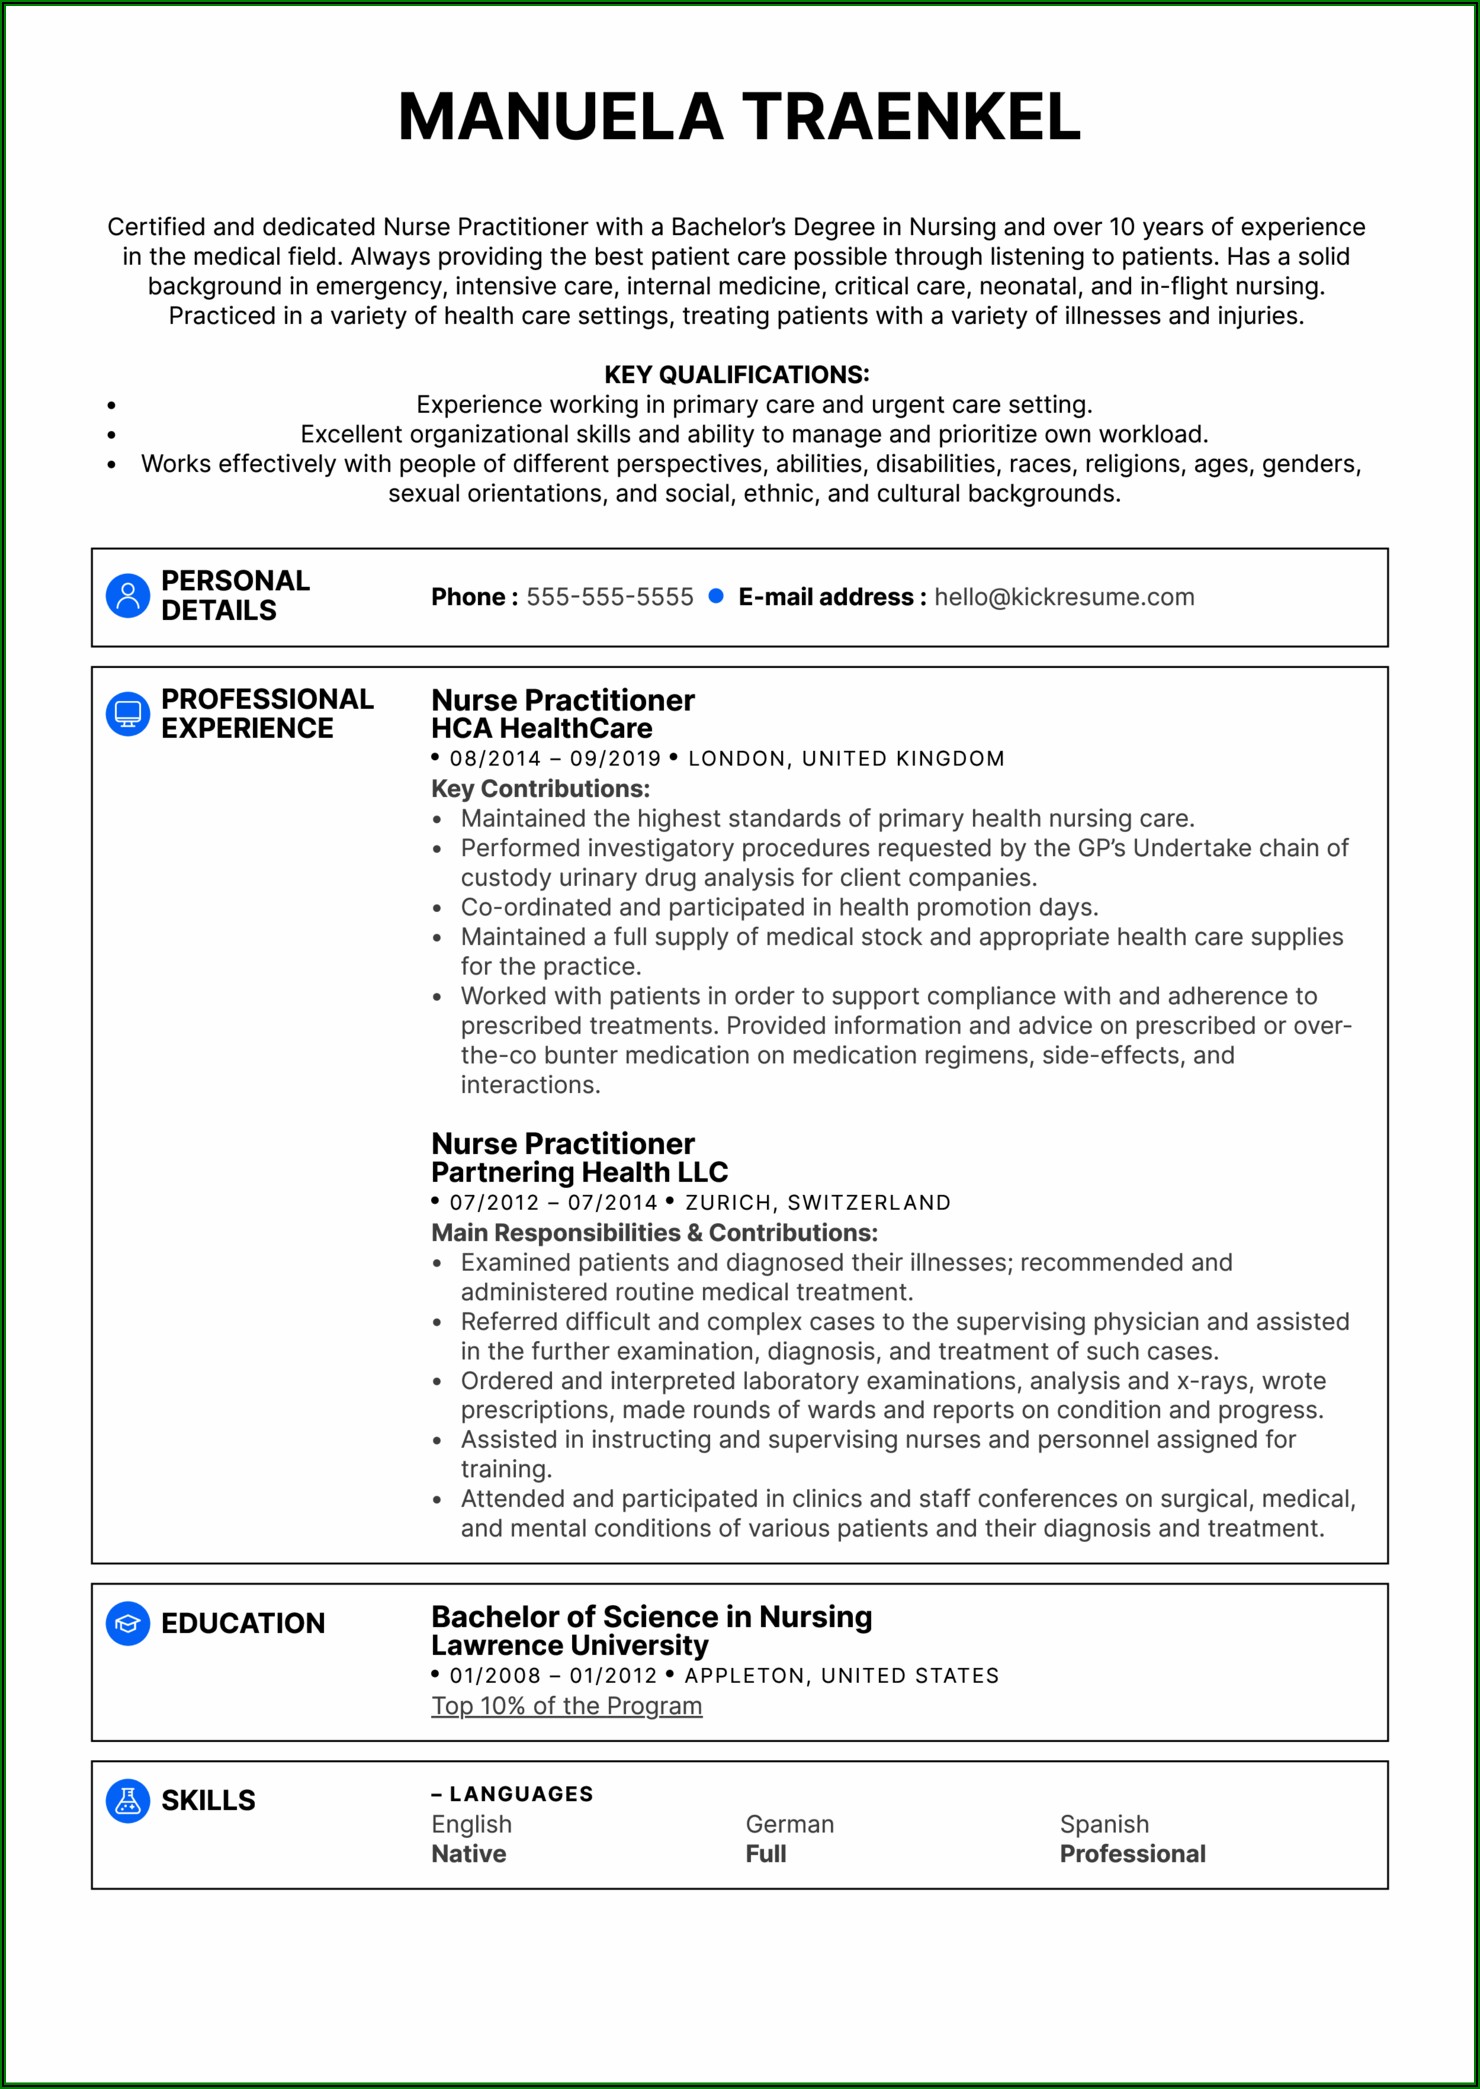 Sample Resumes For Nurse Practitioners